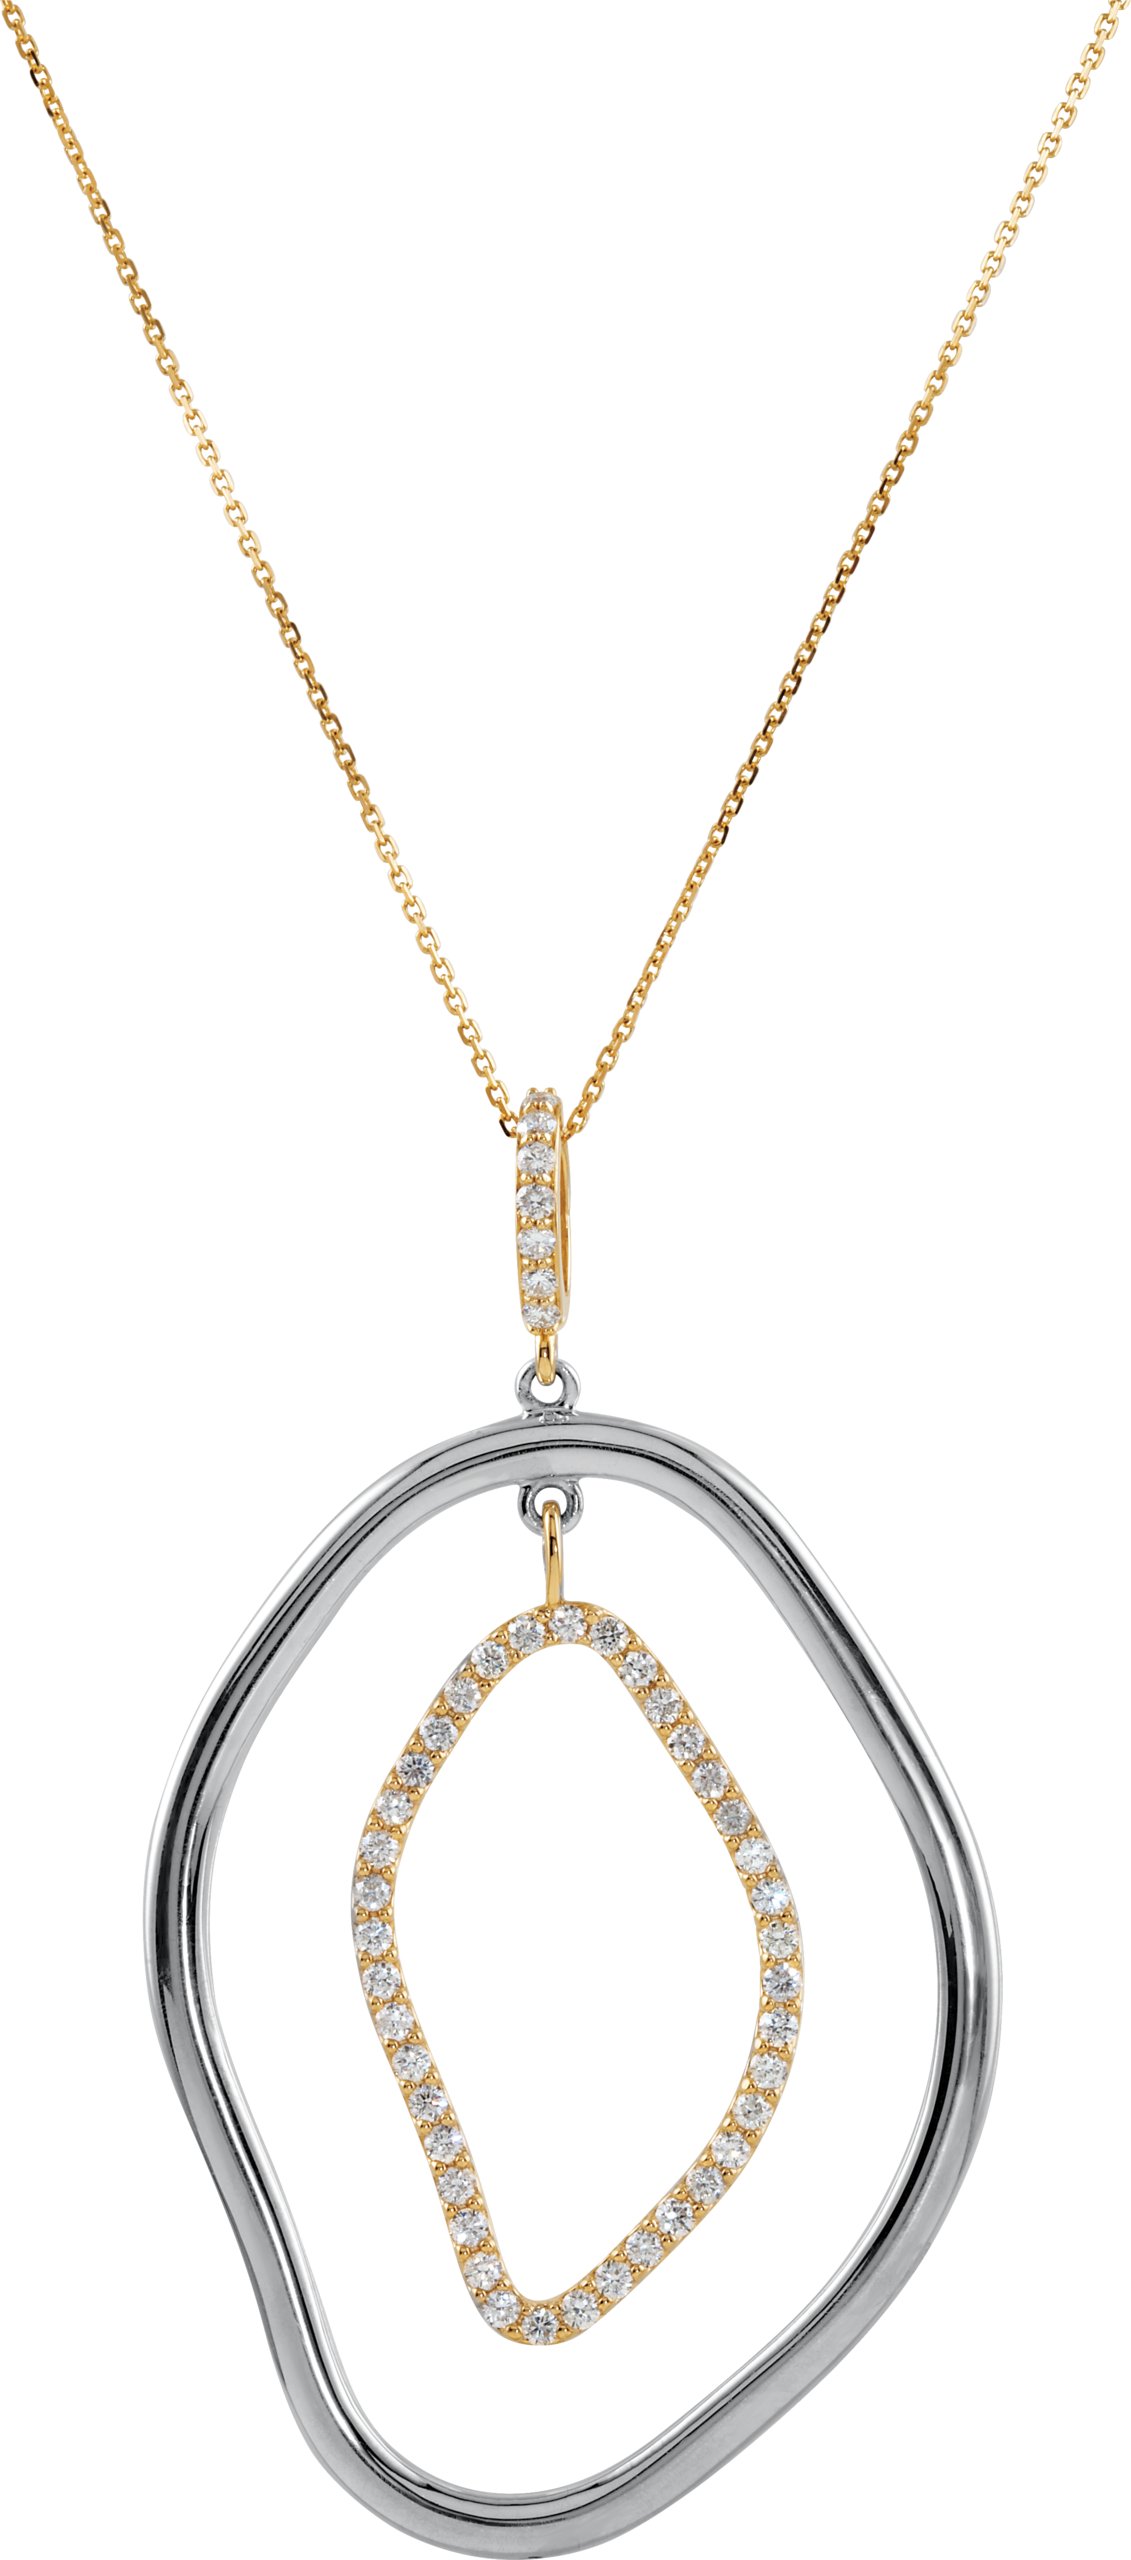 Sterling Silver and 14K Yellow .167 CTW Diamond 18 inch Necklace Ref. 3436892